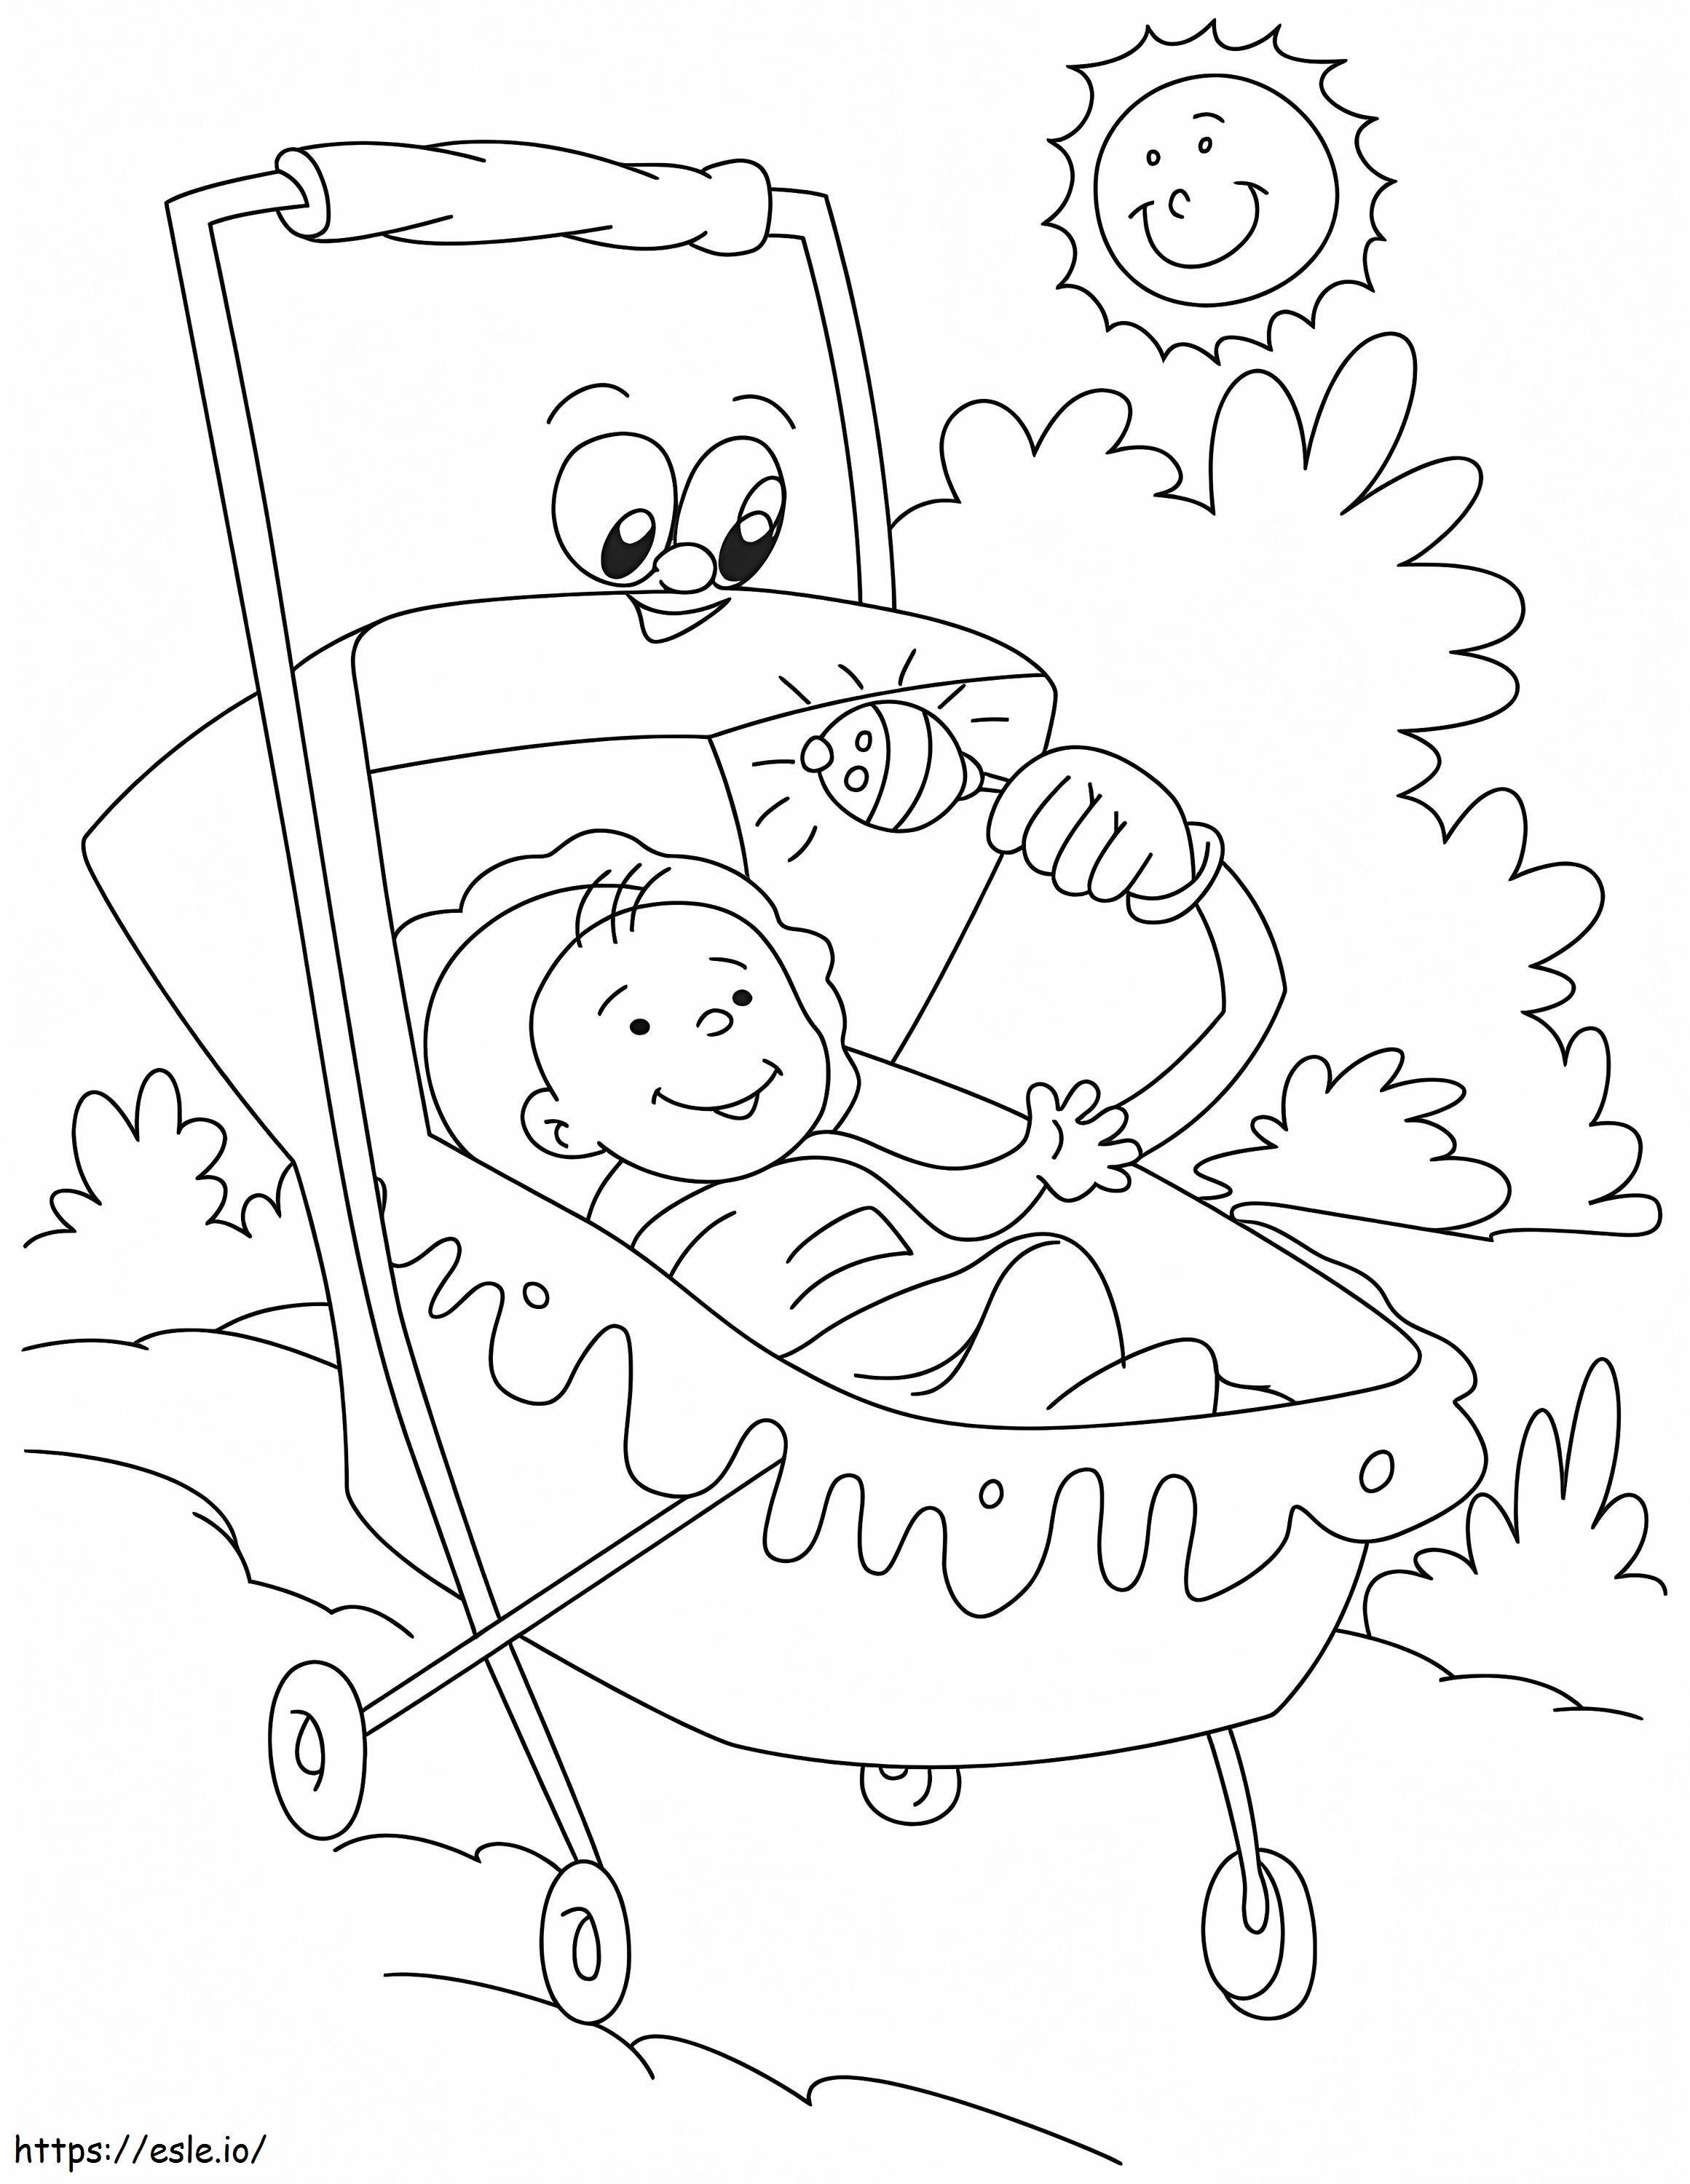 Cartoon Stroller Coloring Page coloring page